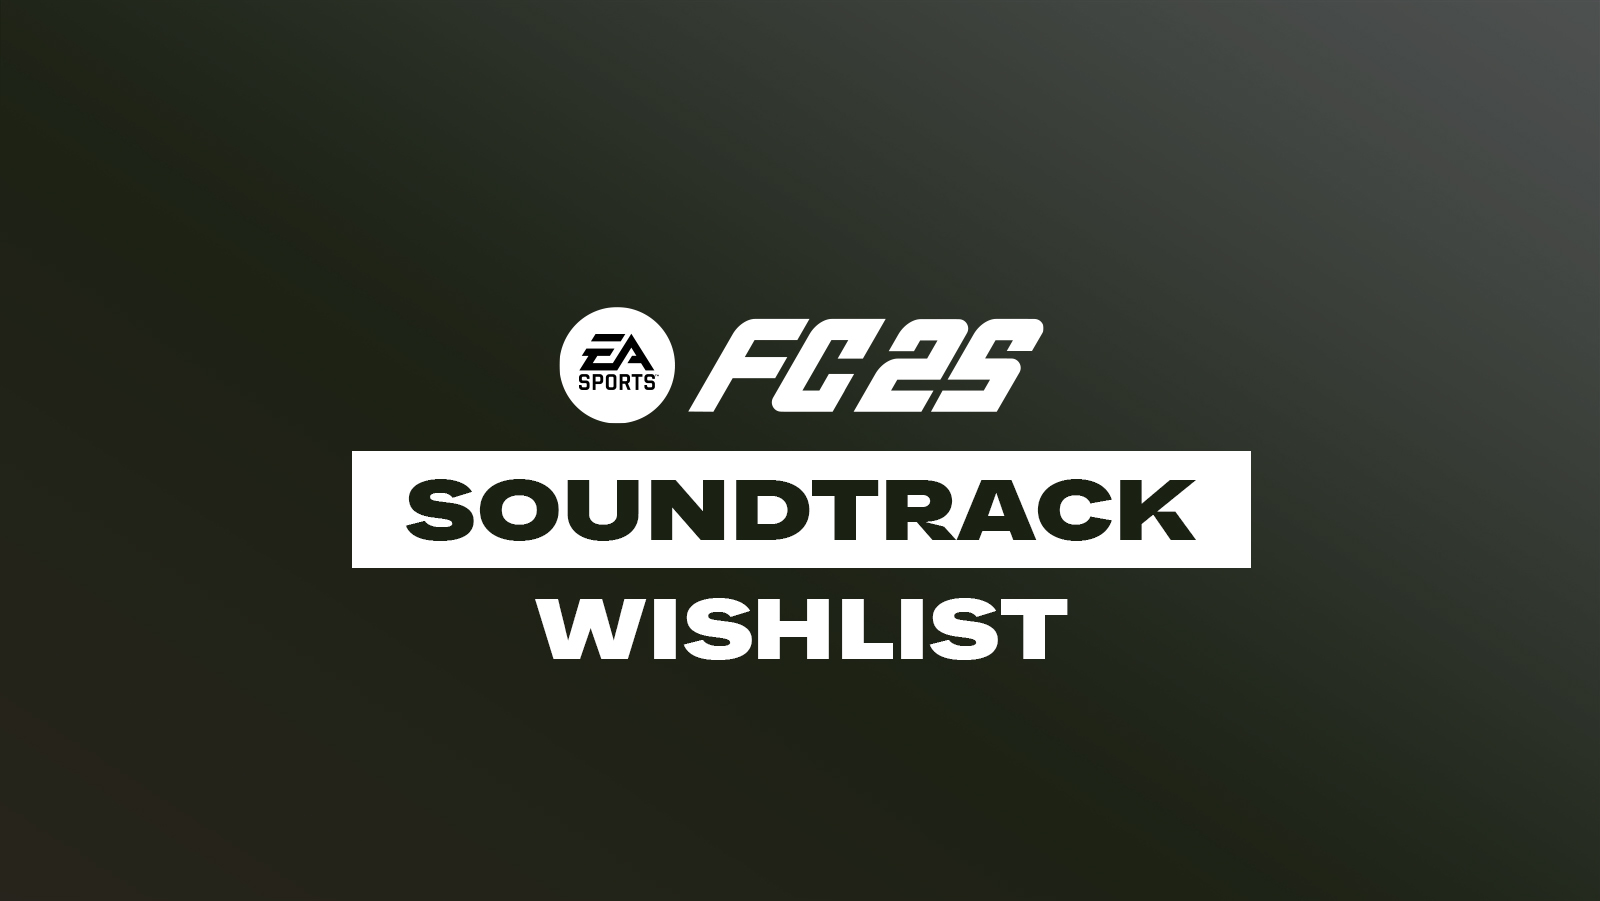 Your soundtrack wishlist for EA Sports FC 25 soccer game.